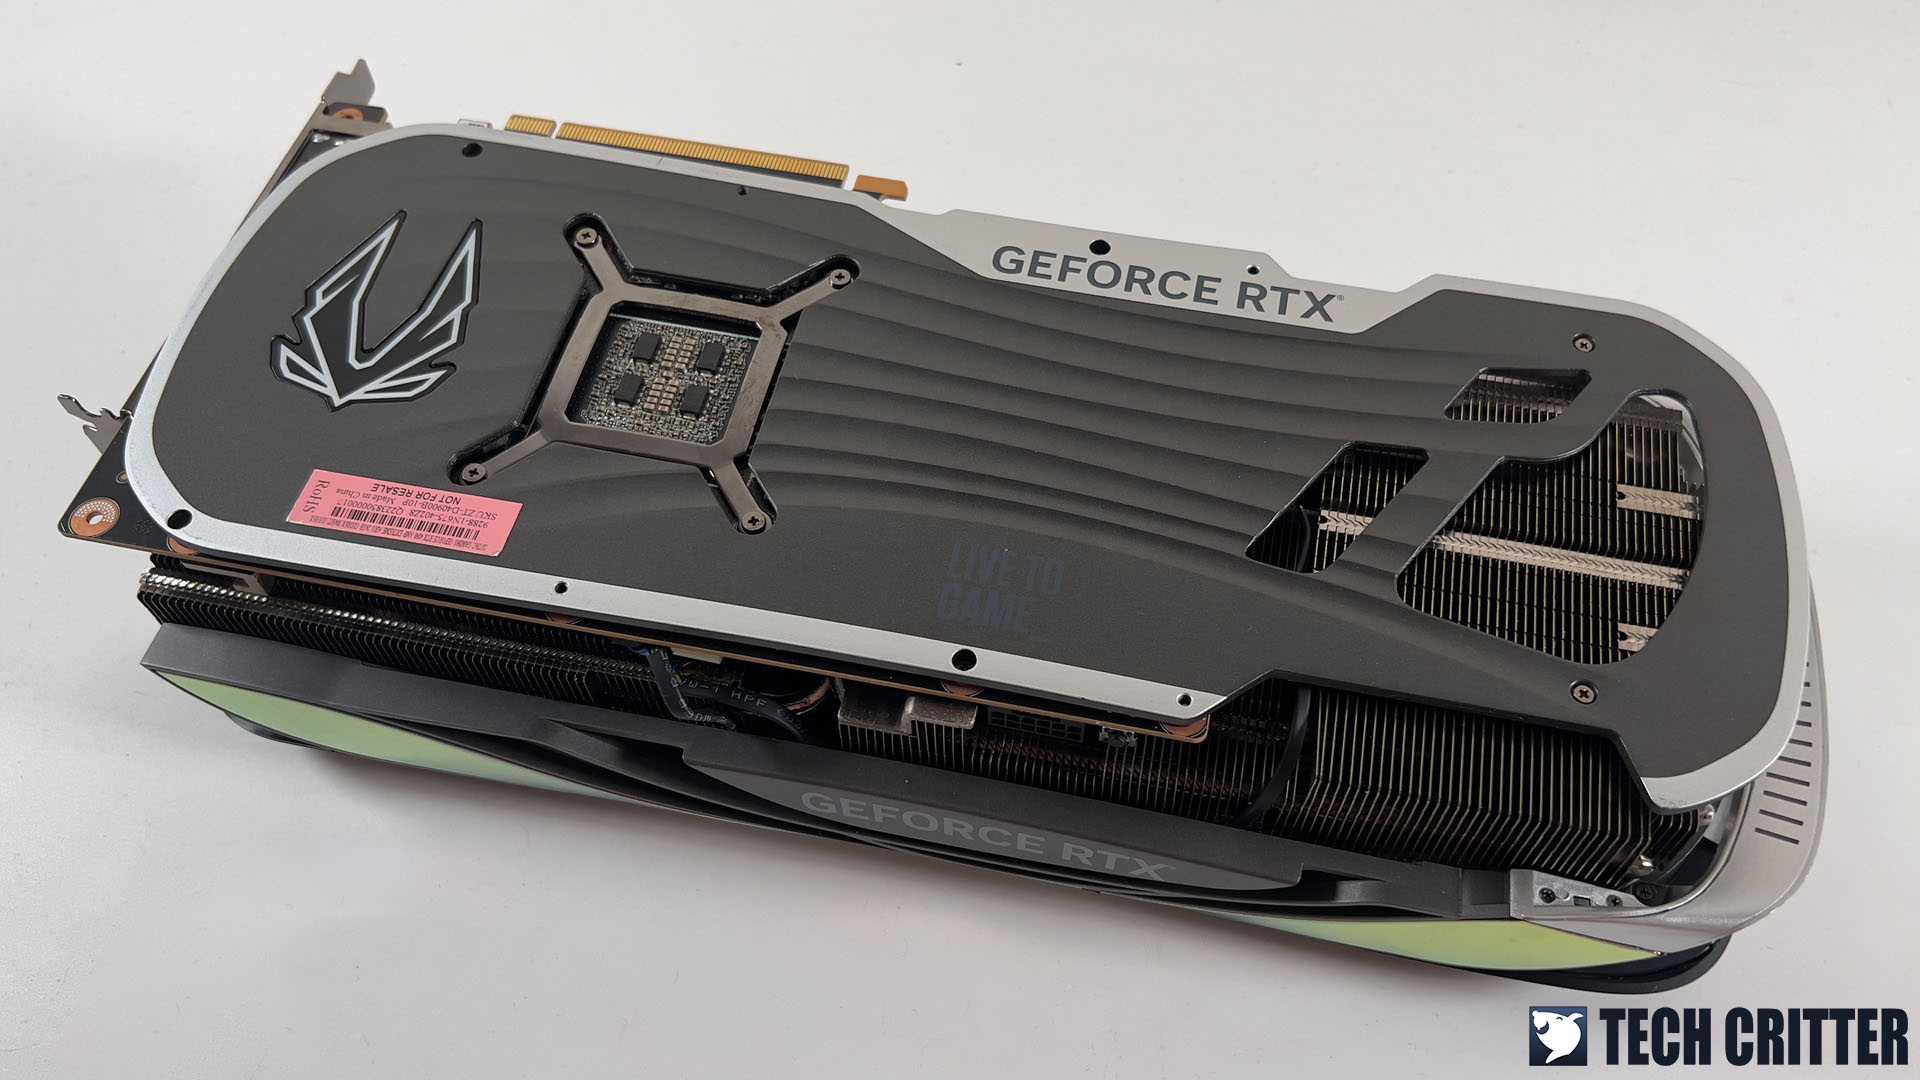 Hands-On Review - ZOTAC GAMING GeForce RTX 4090 AMP Extreme AIRO